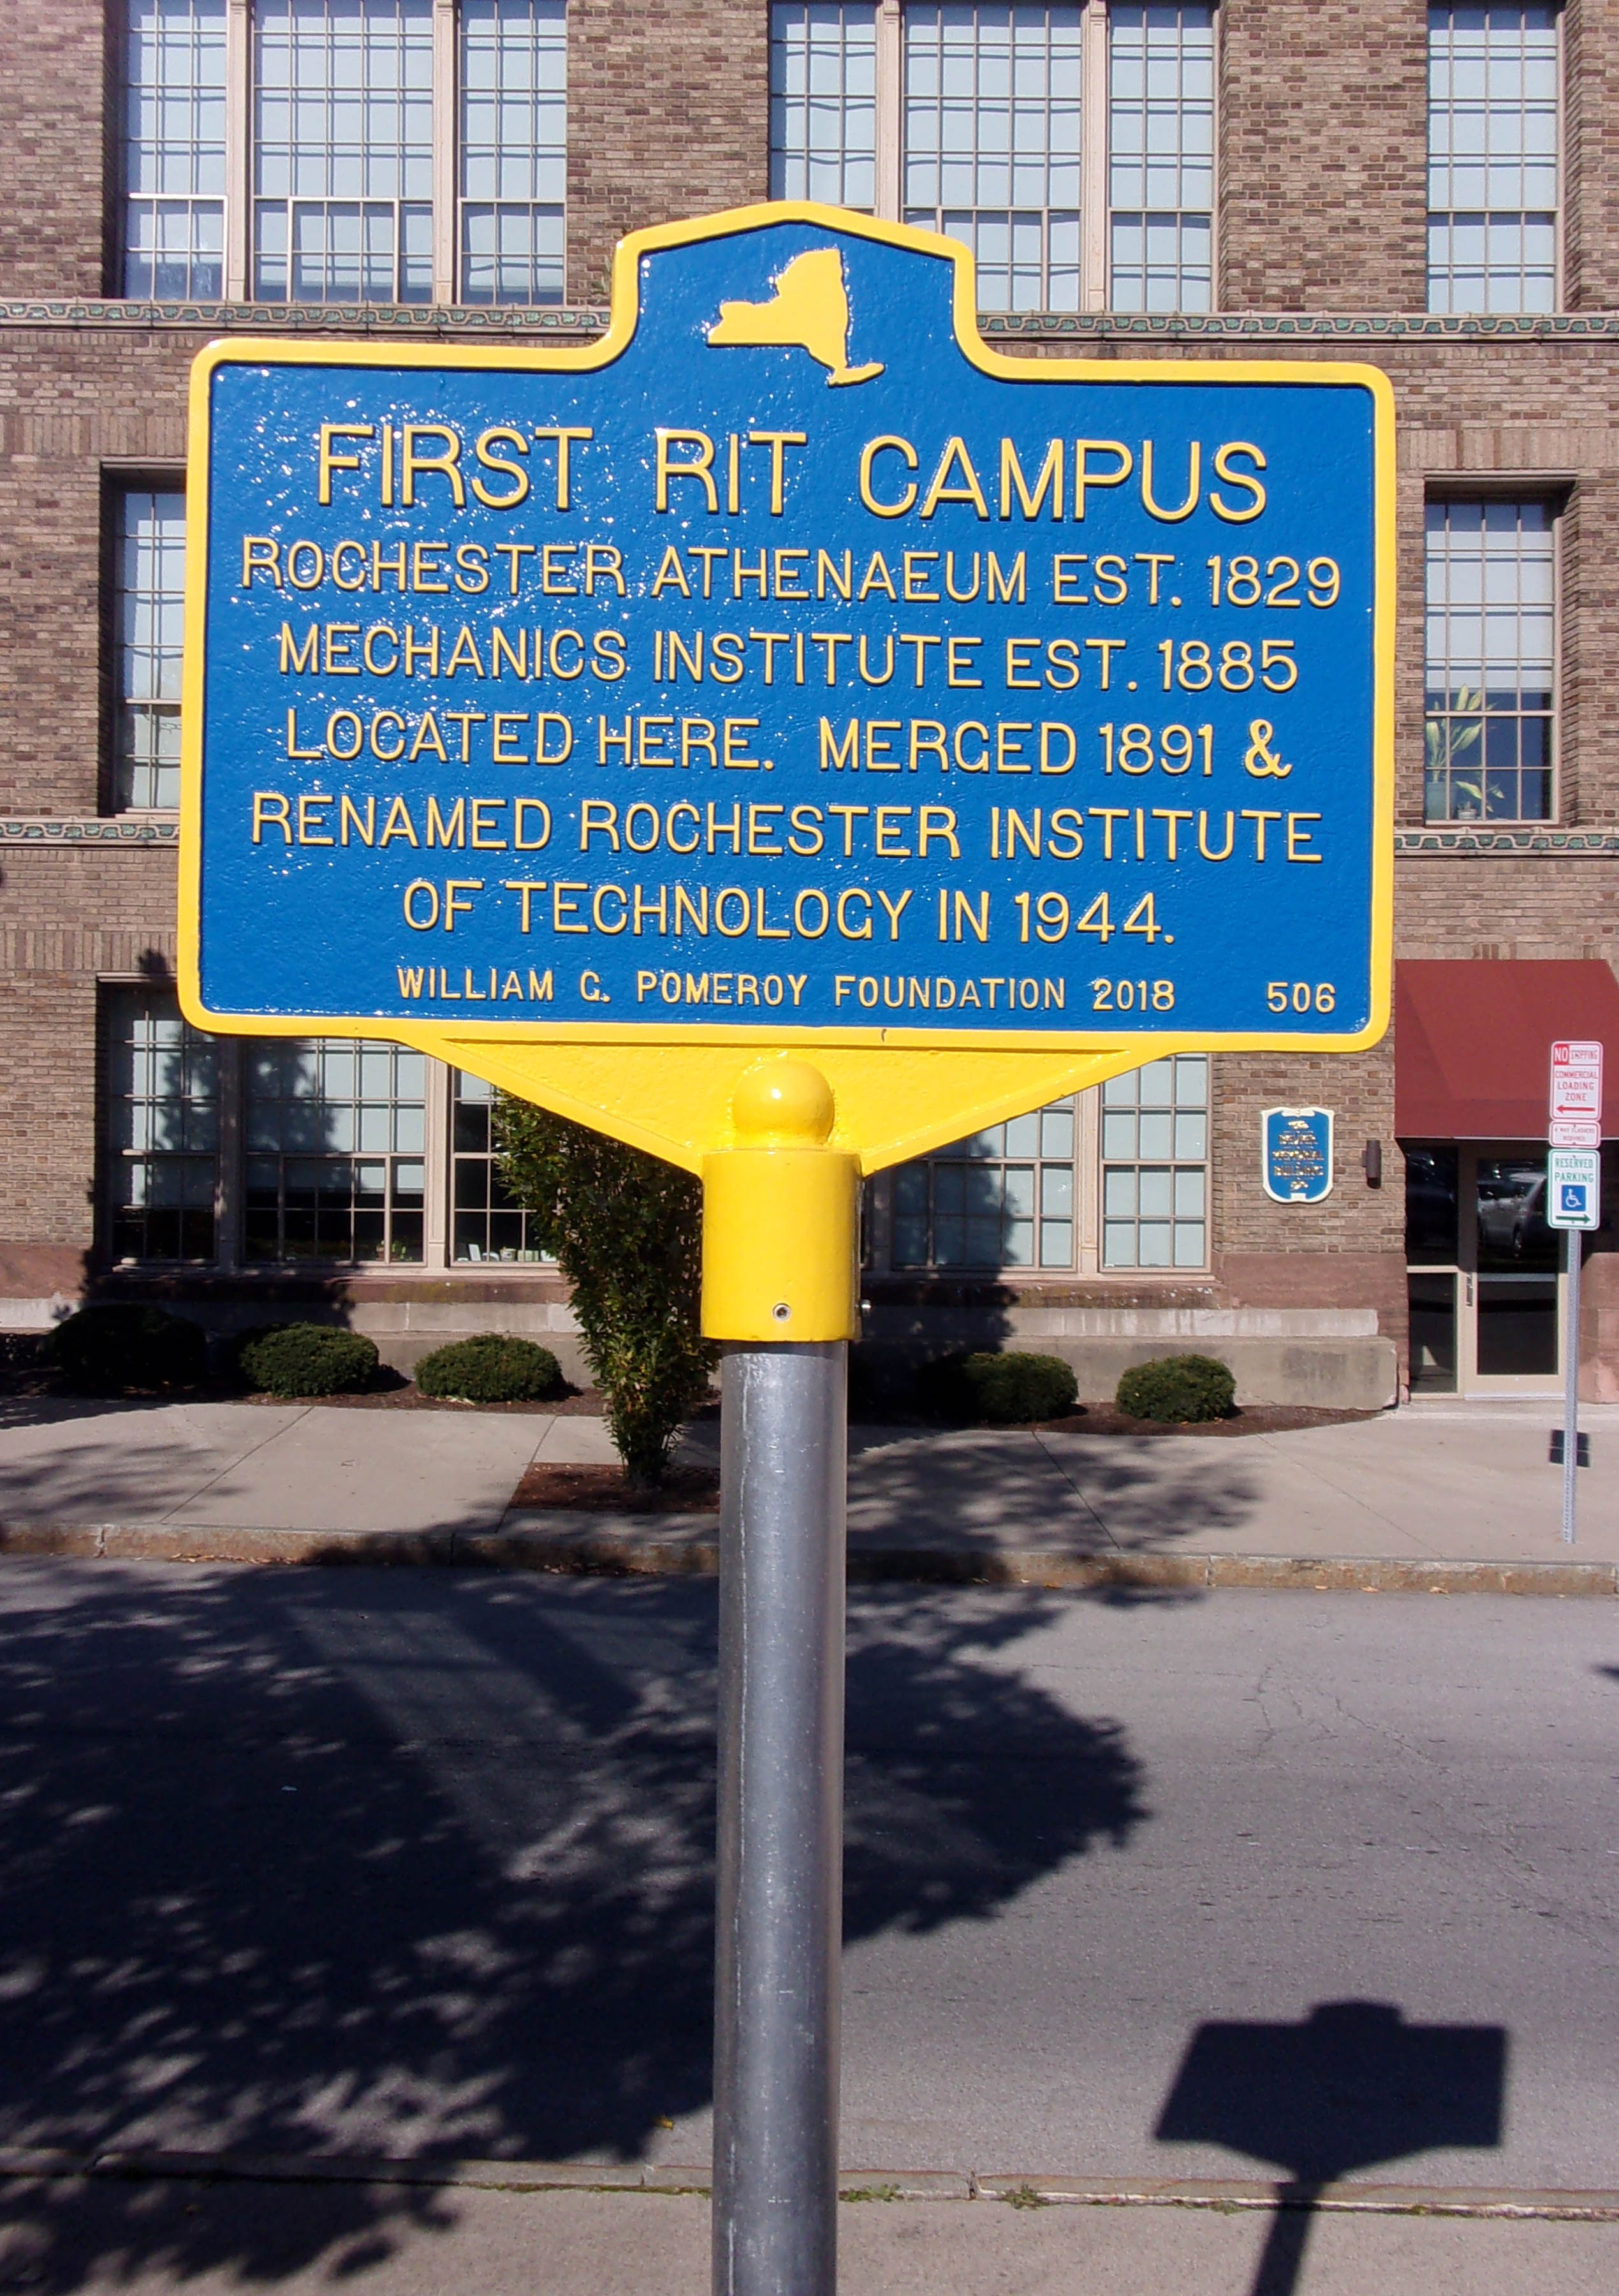 First RIT Campus, Rochester